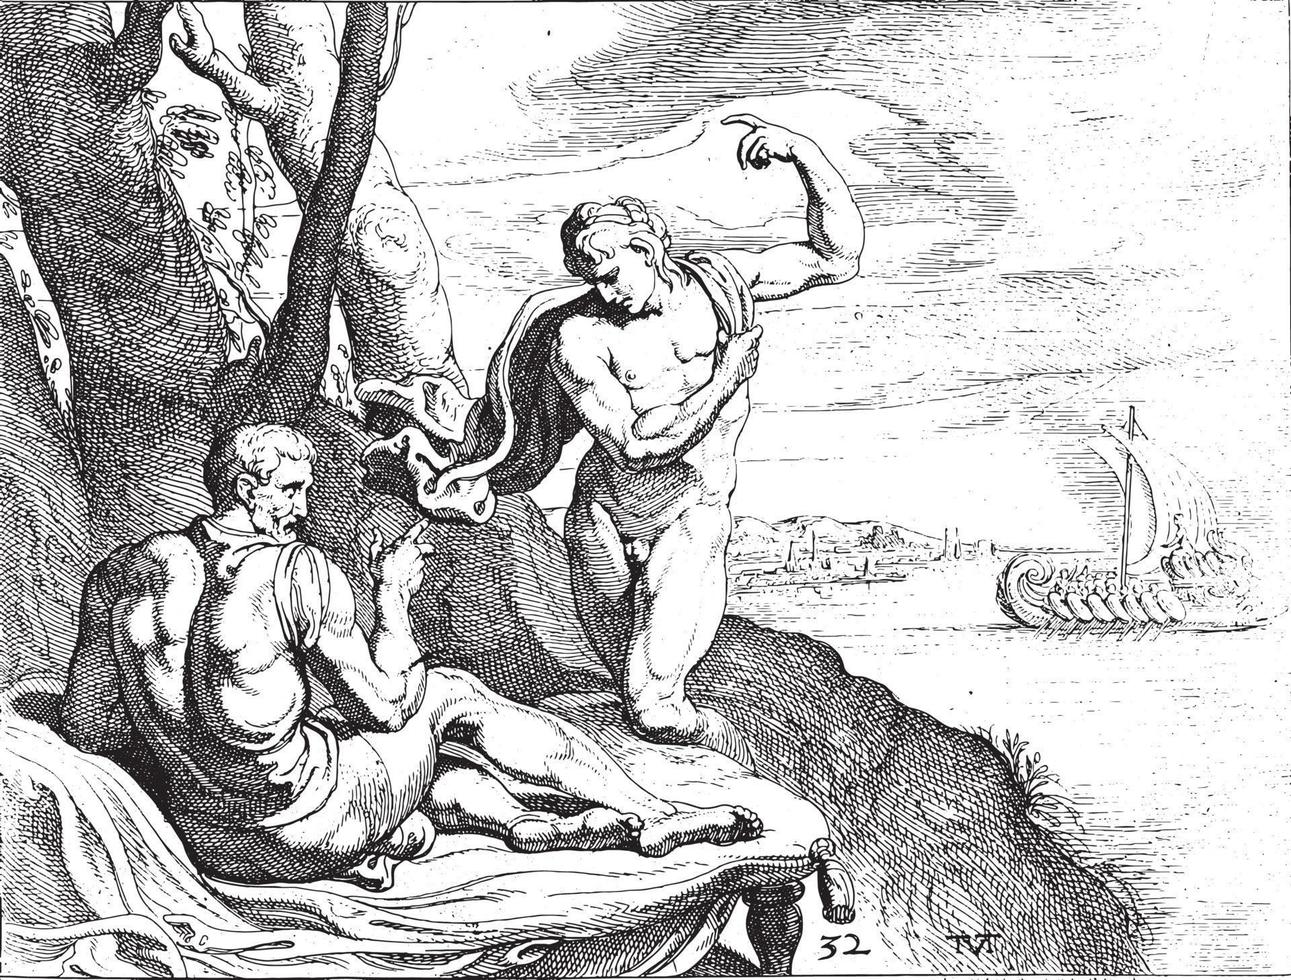 Minerva appears in the guise of Telemachus to Odysseus, vintage illustration. vector